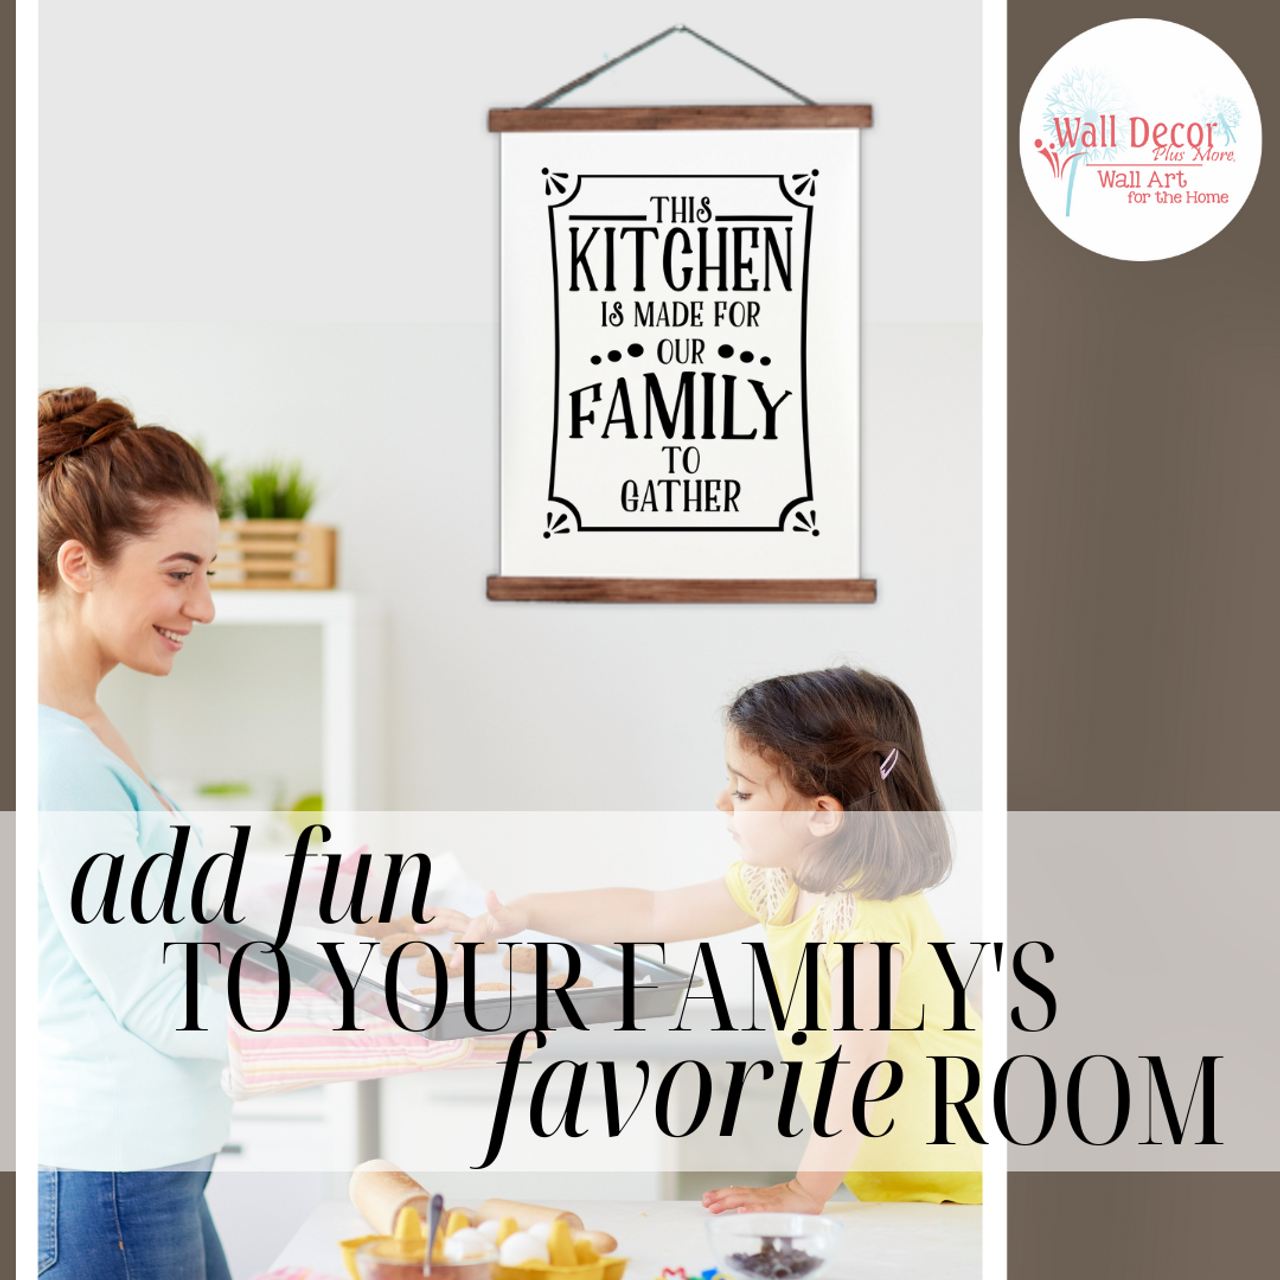 https://cdn11.bigcommerce.com/s-571px4/images/stencil/1280x1280/products/2940/21141/CWH0132_kitchen_family_gather_canvas_wall_haning_wall_decor__66397.1688417366.png?c=2